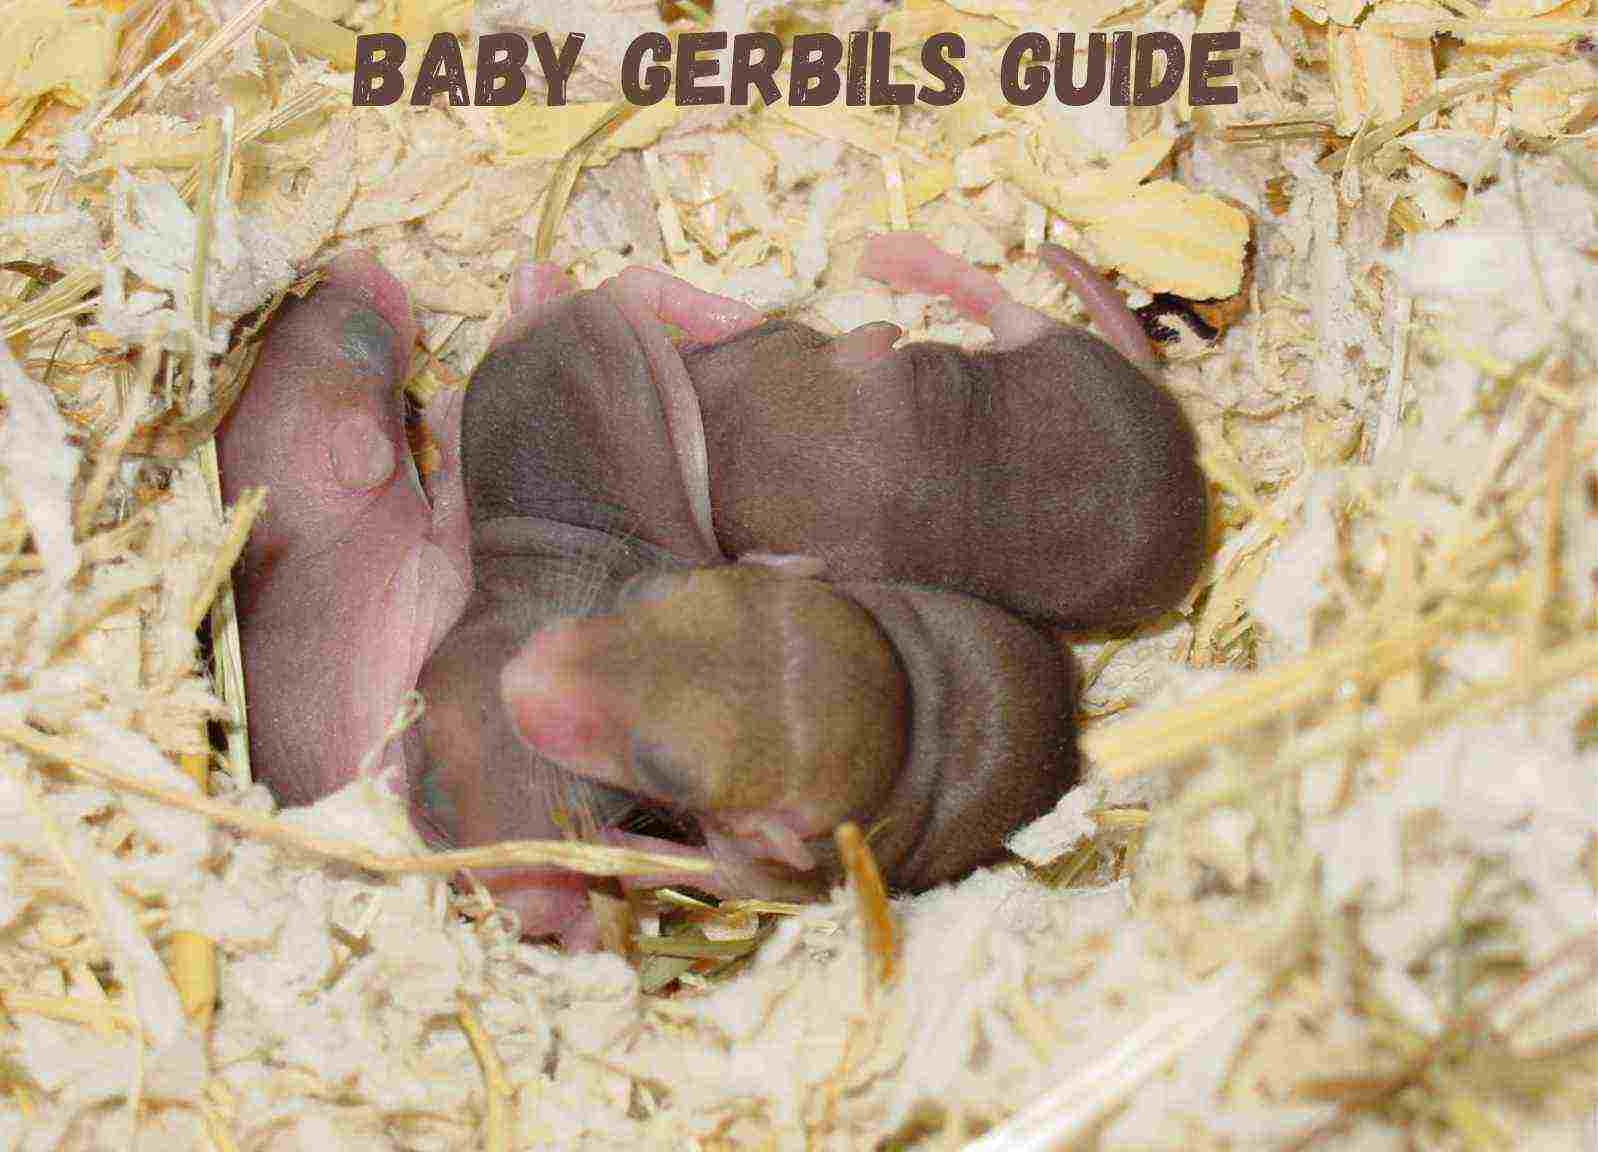 How To Look After Baby Gerbils